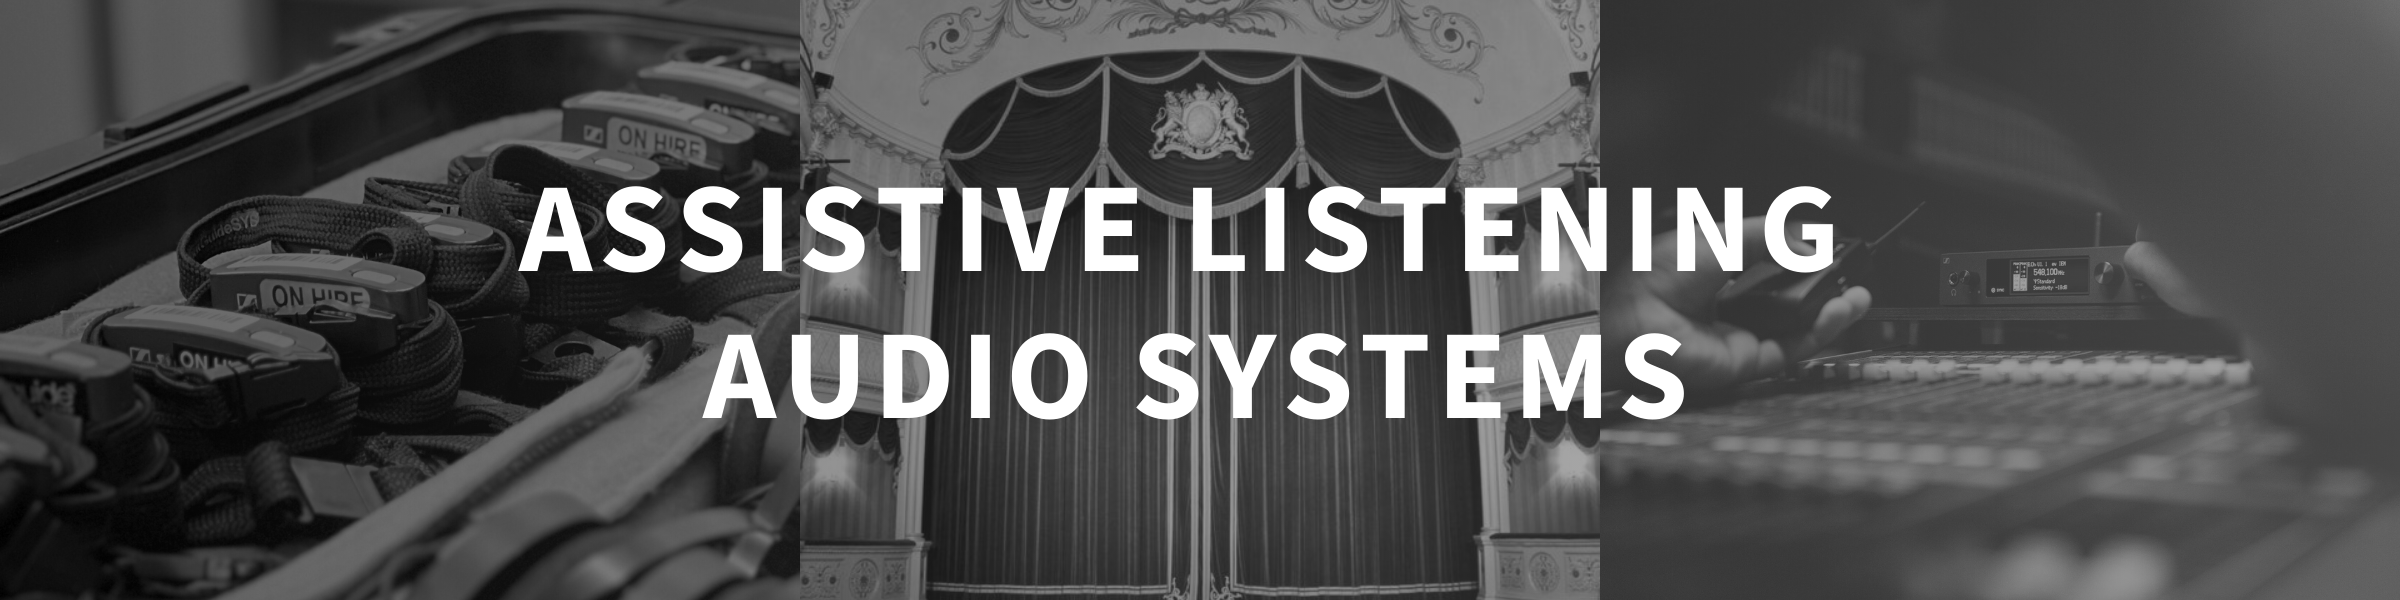 Assistive Listening Audio Systems